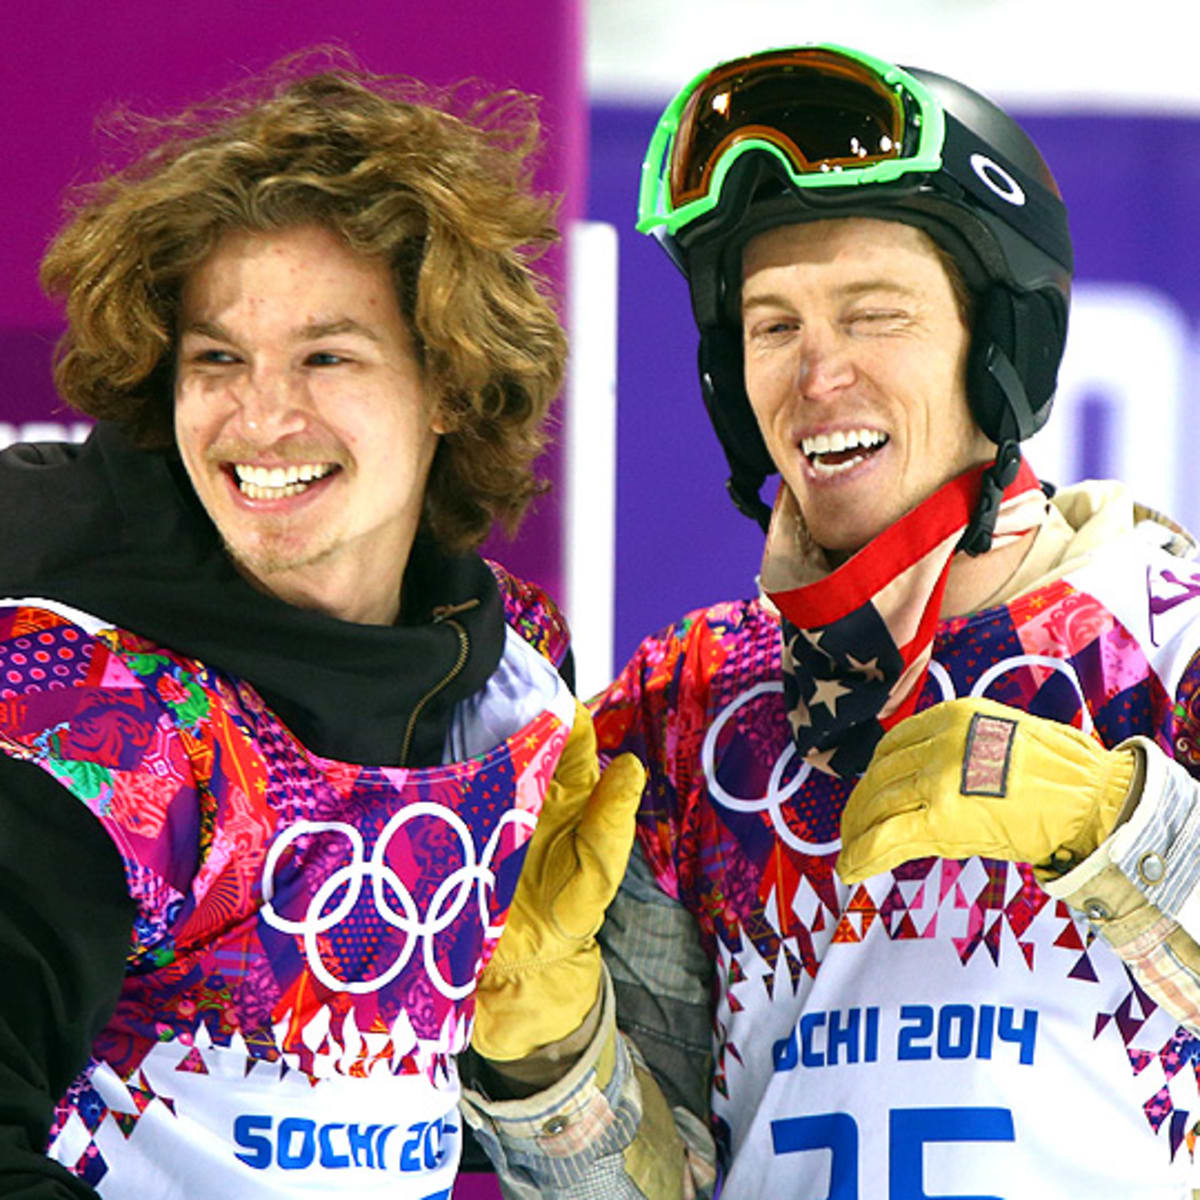 Vancouver 2010: Shaun White Gets 'Twisted' on Winning Run